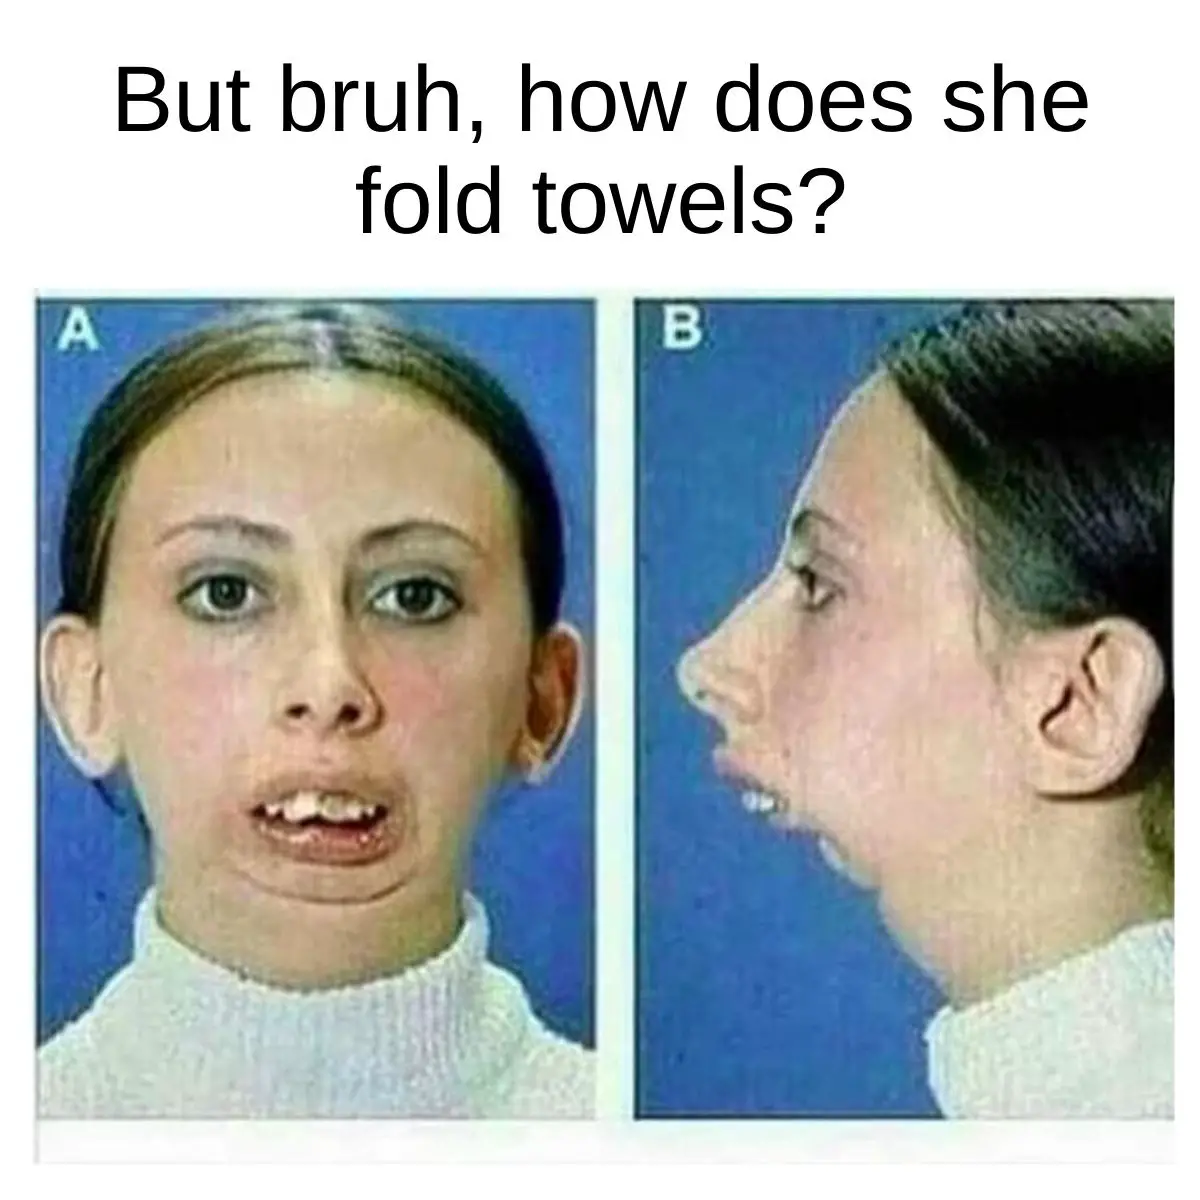 No Chine Meme on Towels